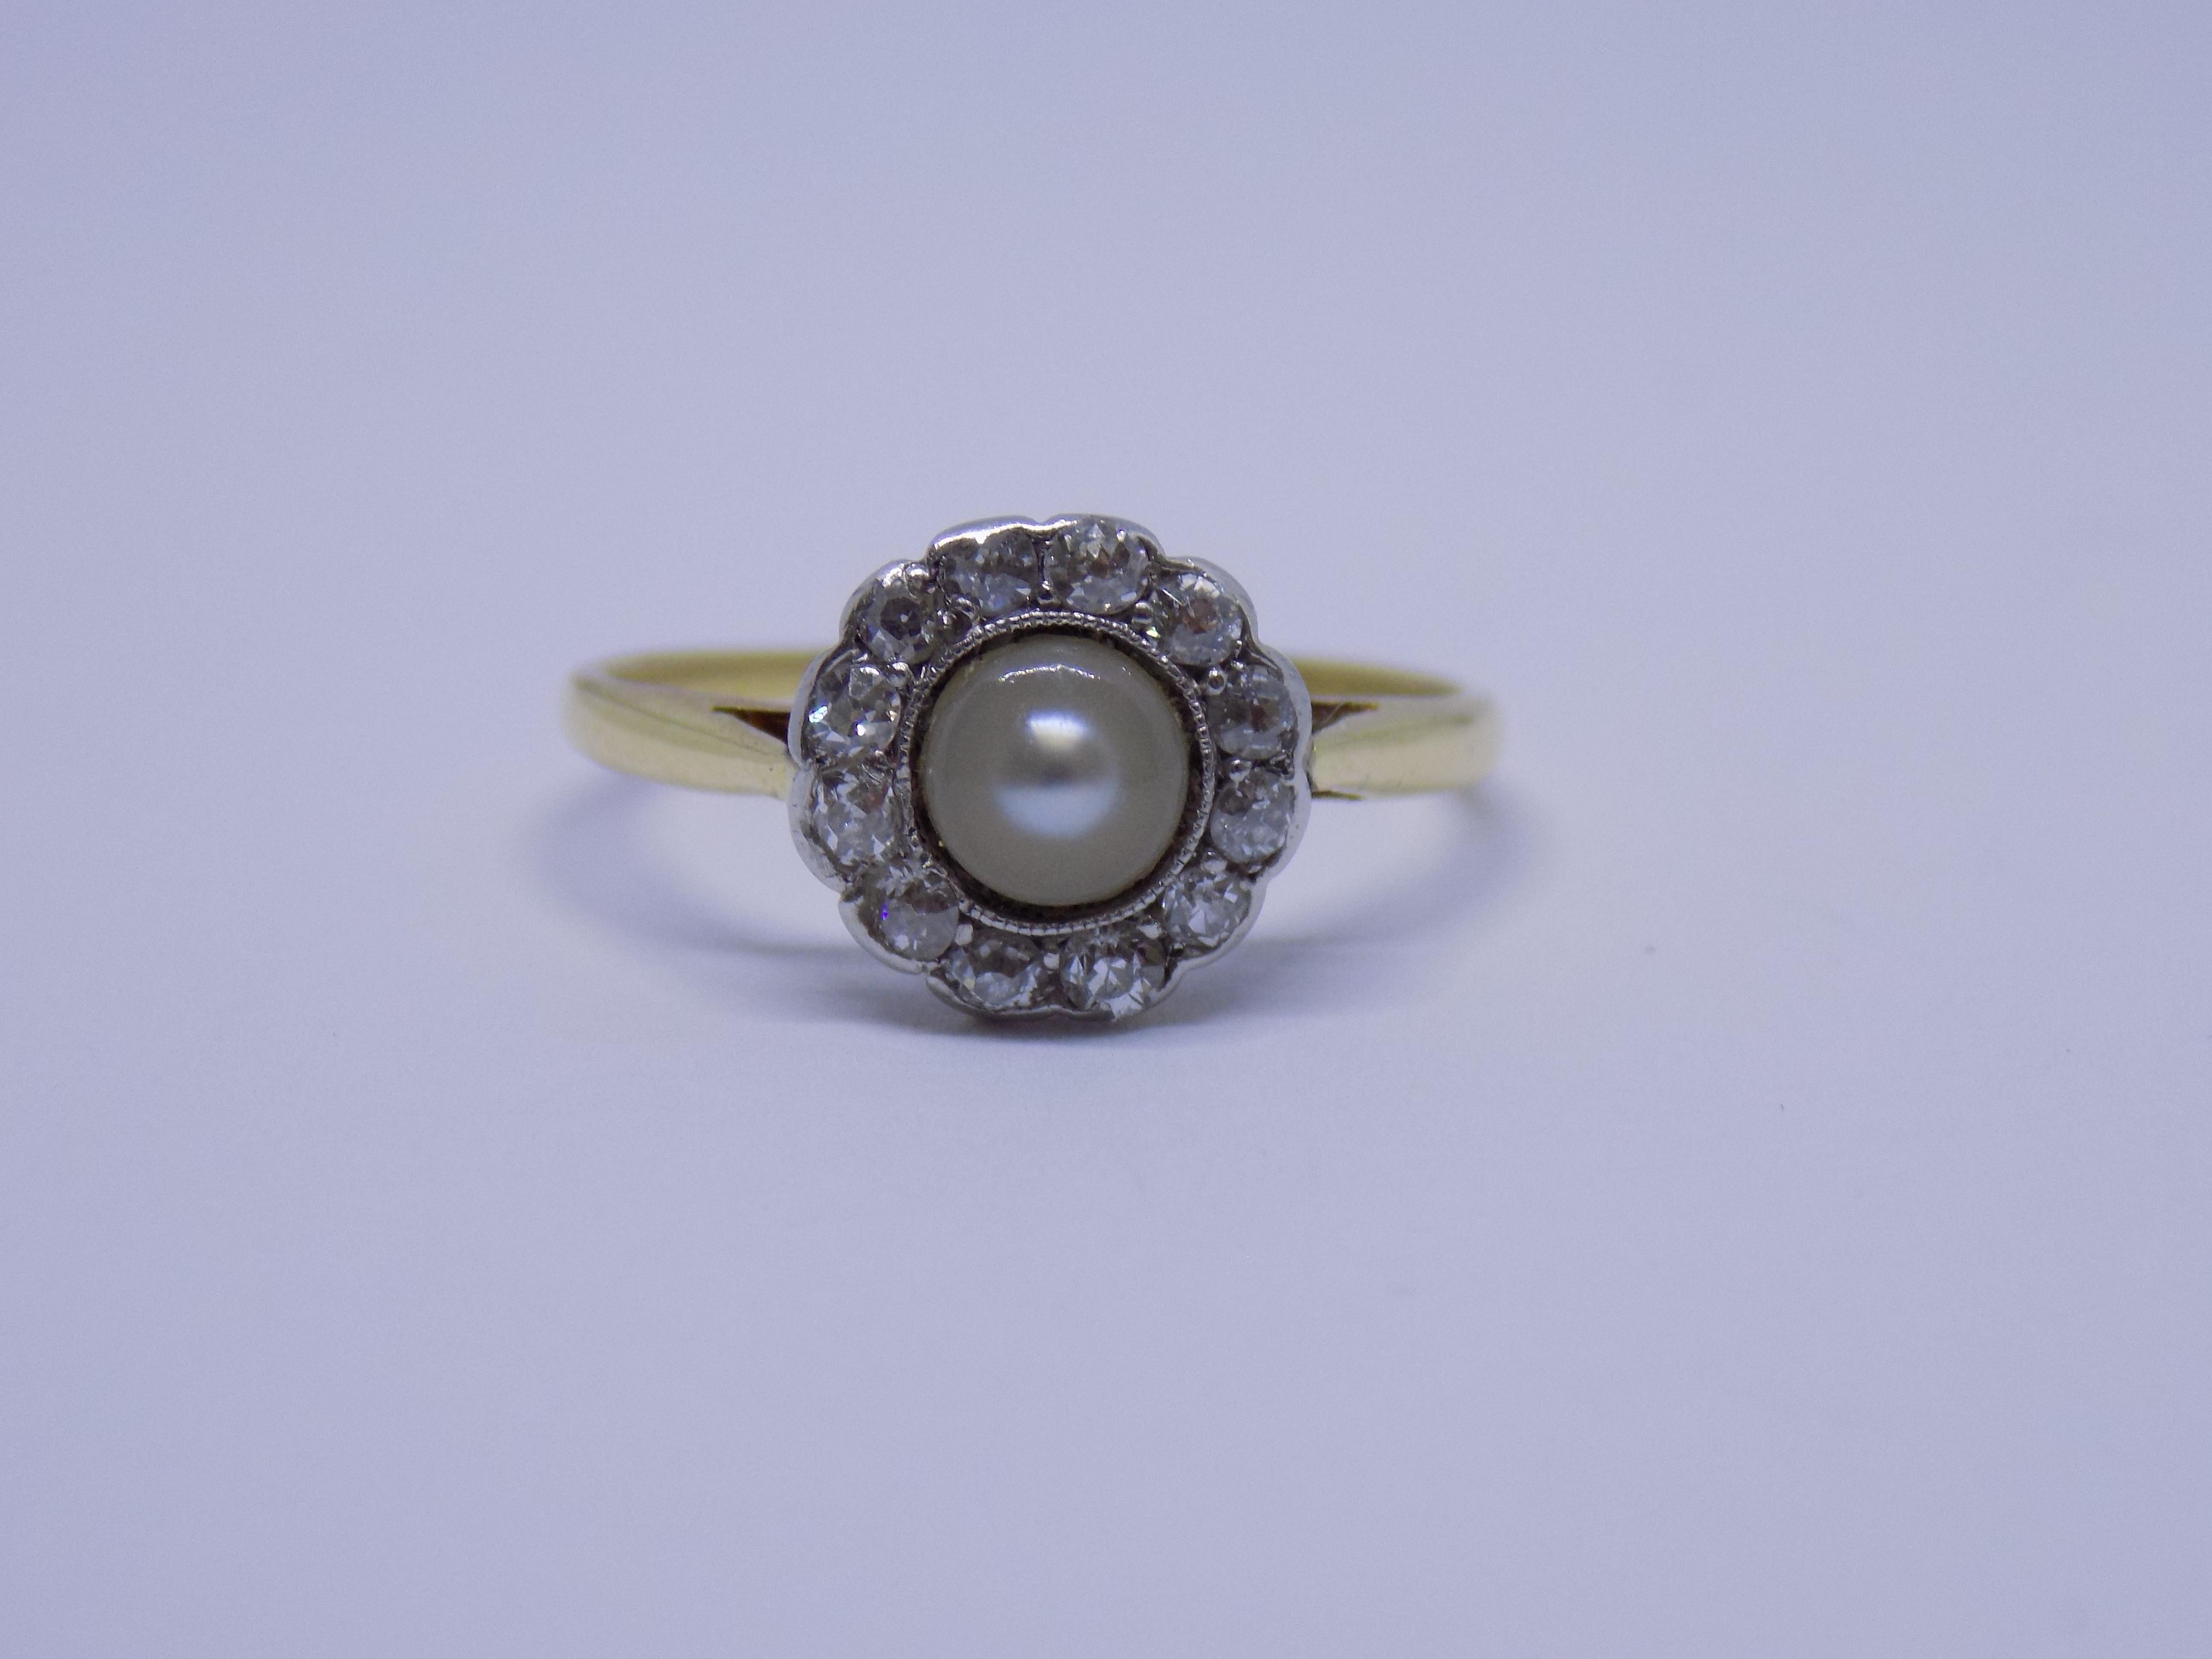 An Edwardian c.1910s timeless classic 18 Carat Gold, Platinum, Pearl and old European cut Diamond Halo ring. Diamonds mounted in Platinum setting. 
English origin.
Size K UK, 5.5 US  (sizable). 
Height of the face 9mm. 
Unmarked, tested 18 Carat